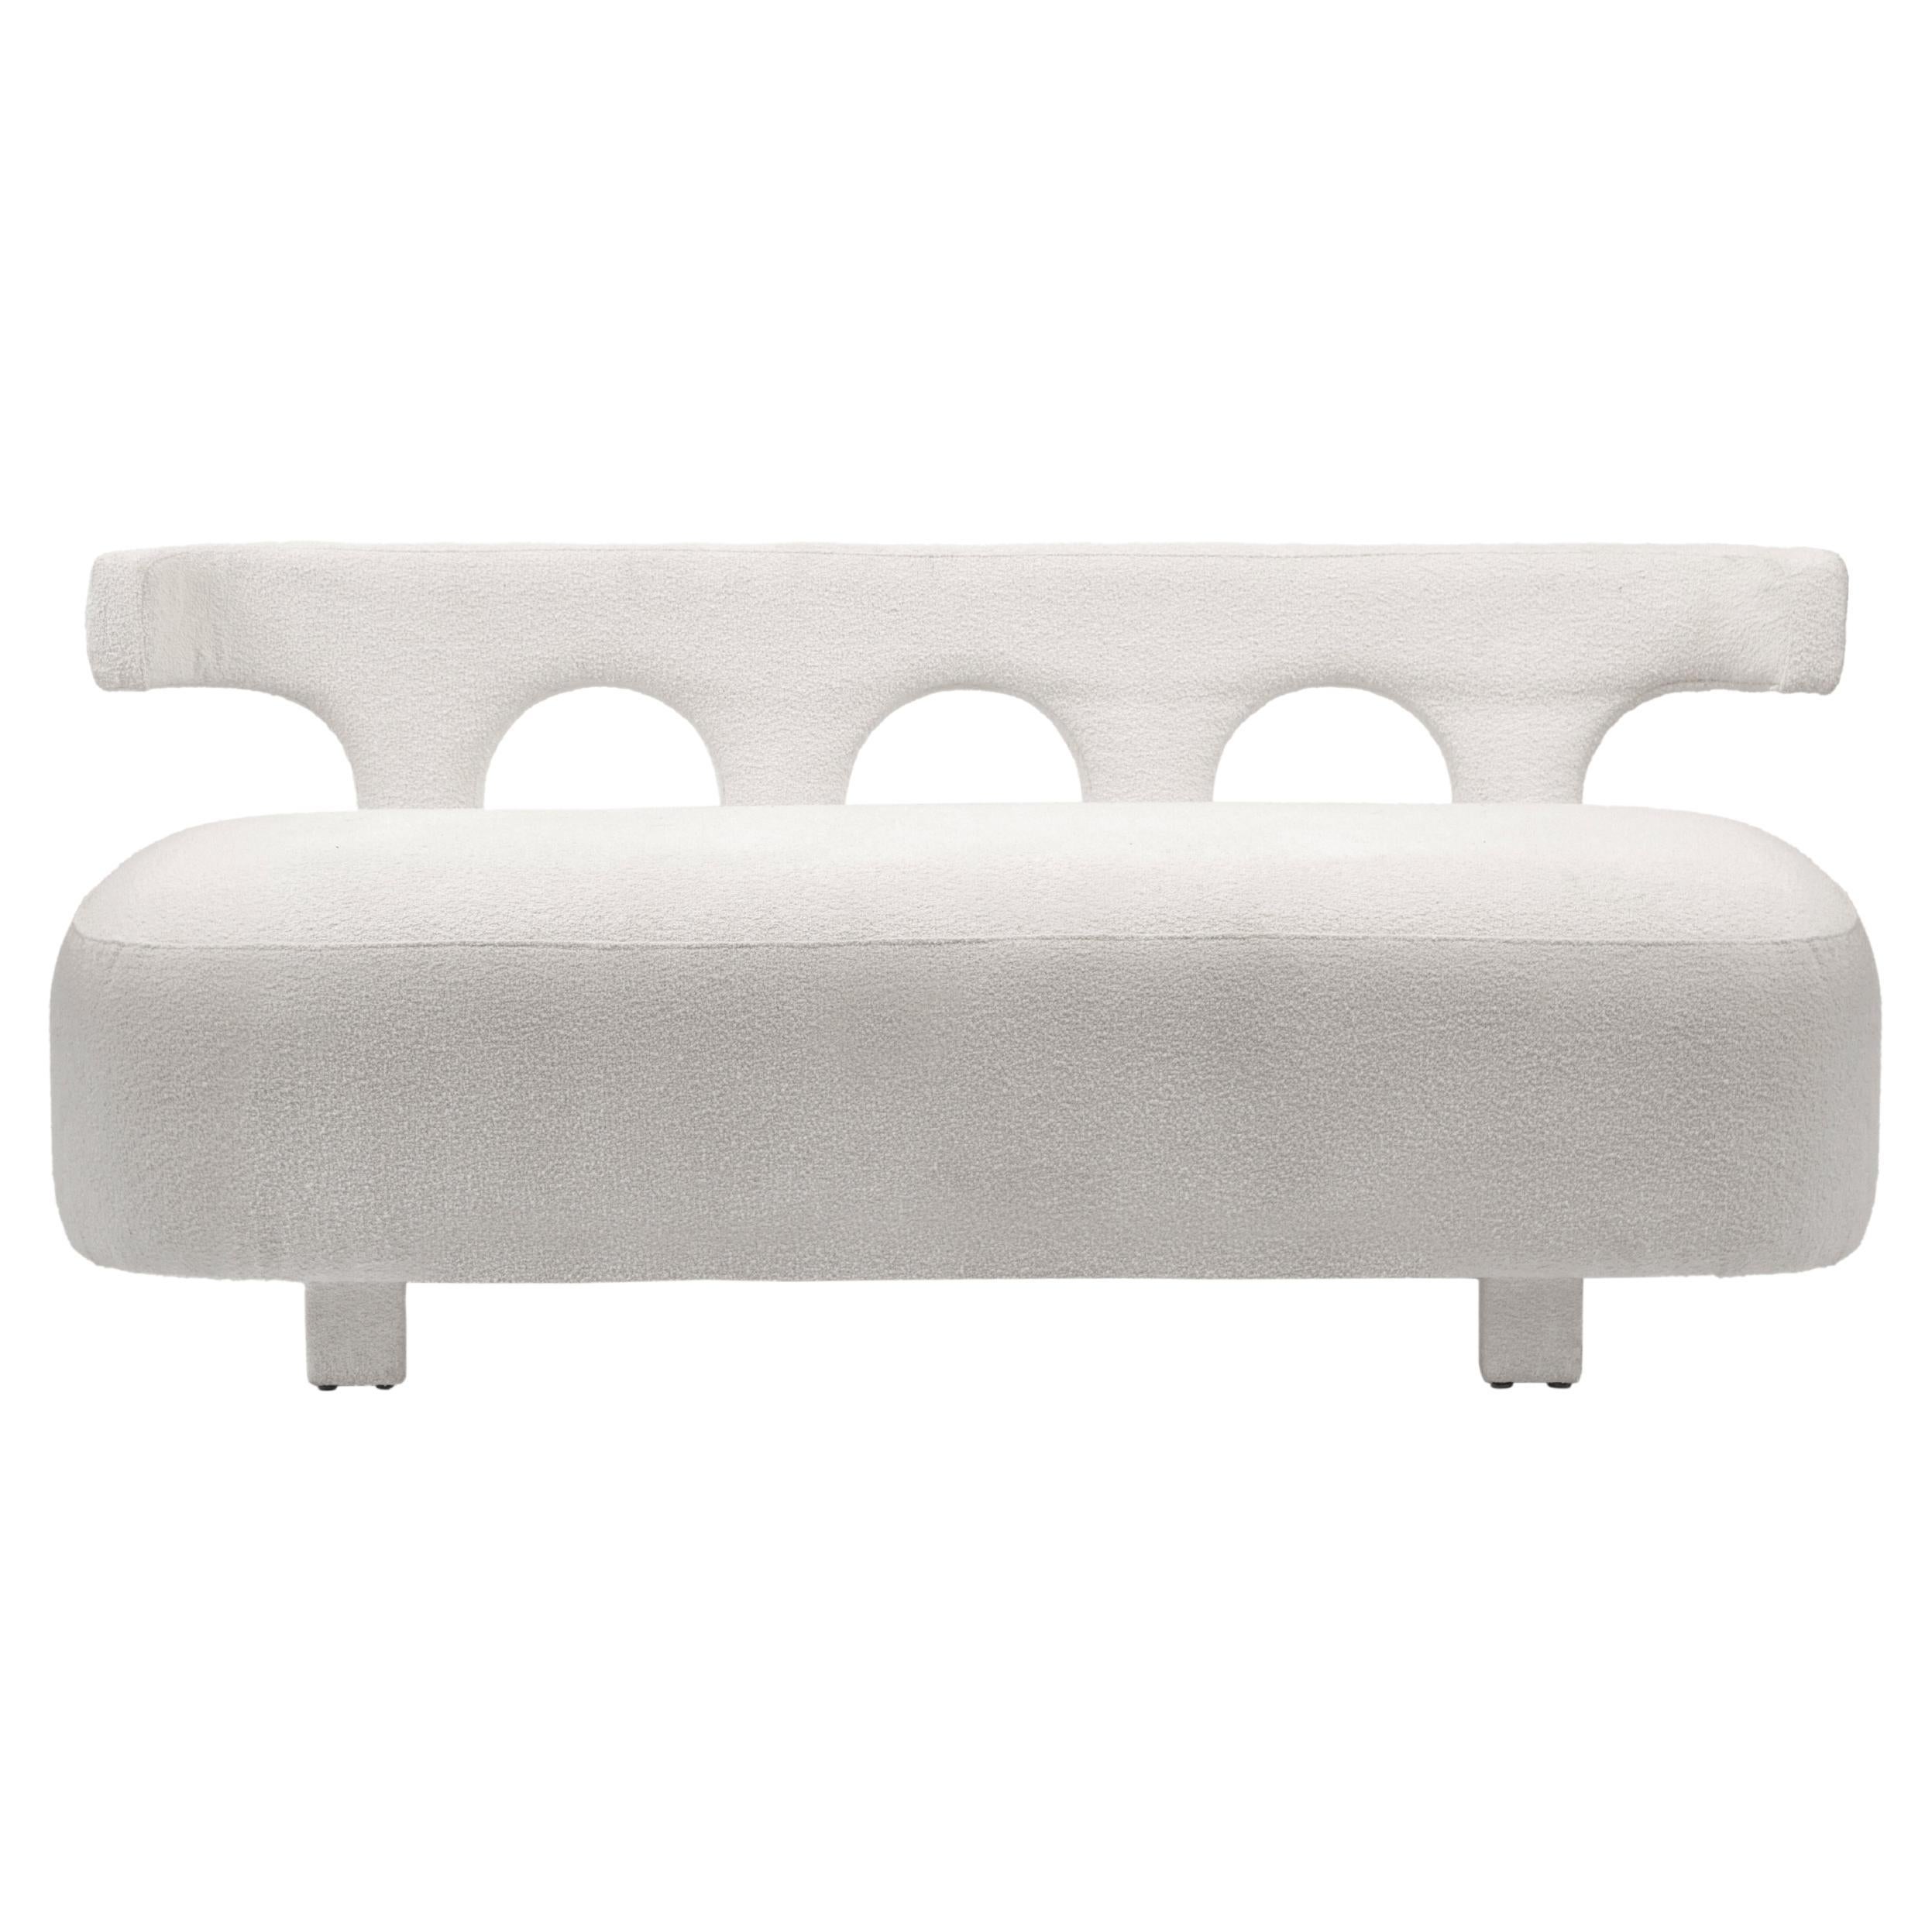 White Curvy Upholstered Sofa Inspired By Egypt's Nubian Architecture For Sale